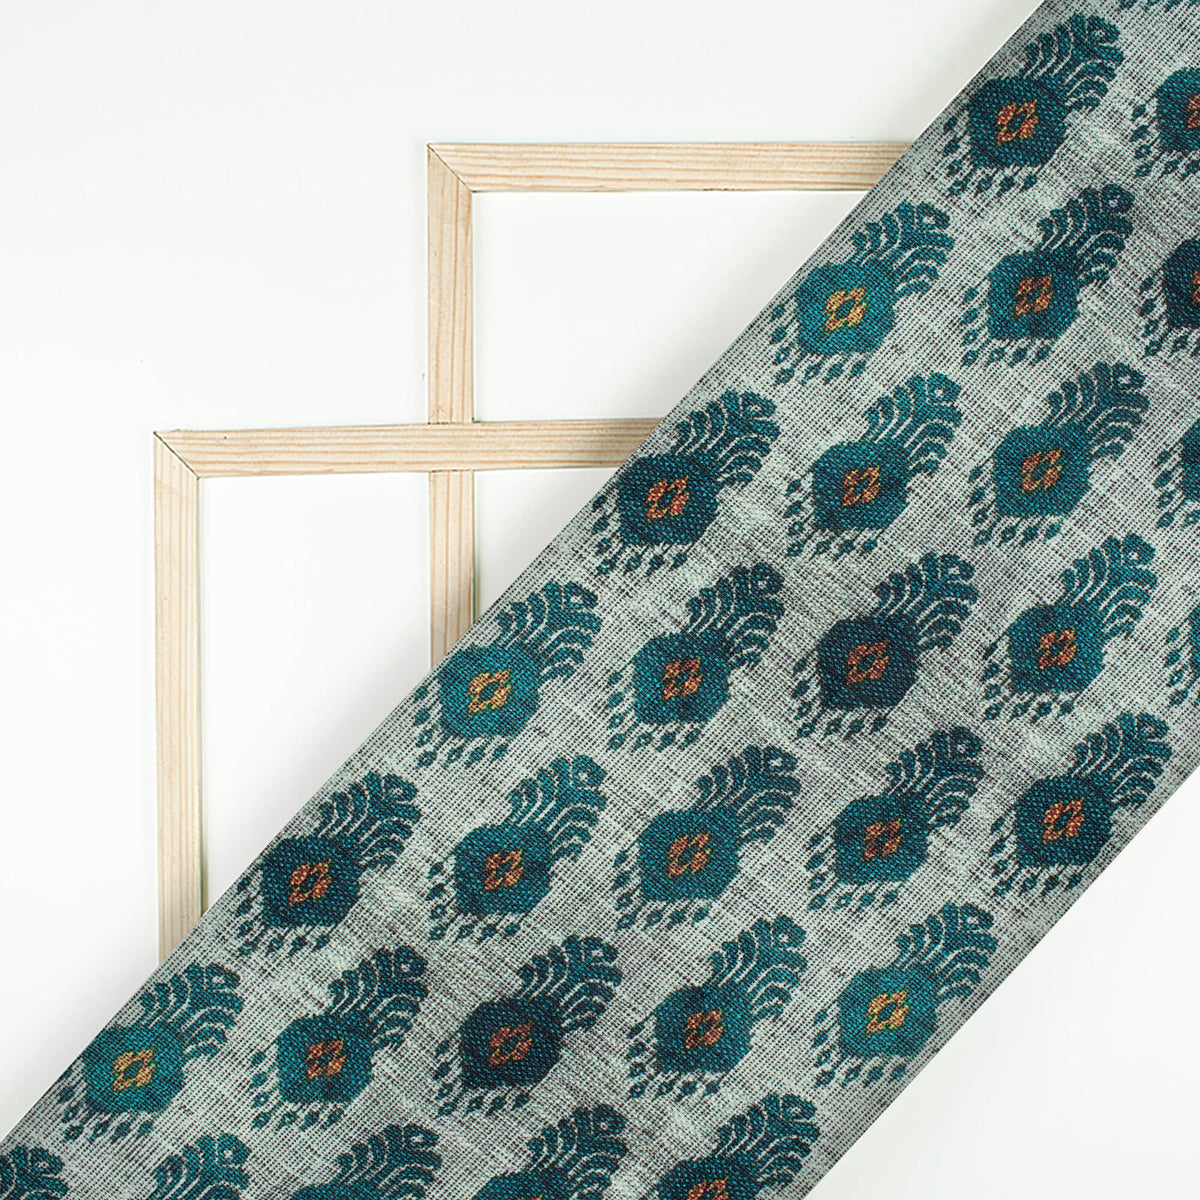 Steel Grey And Pine Green Ethnic Pattern Digital Print Linen Textured Fabric (Width 56 Inches)